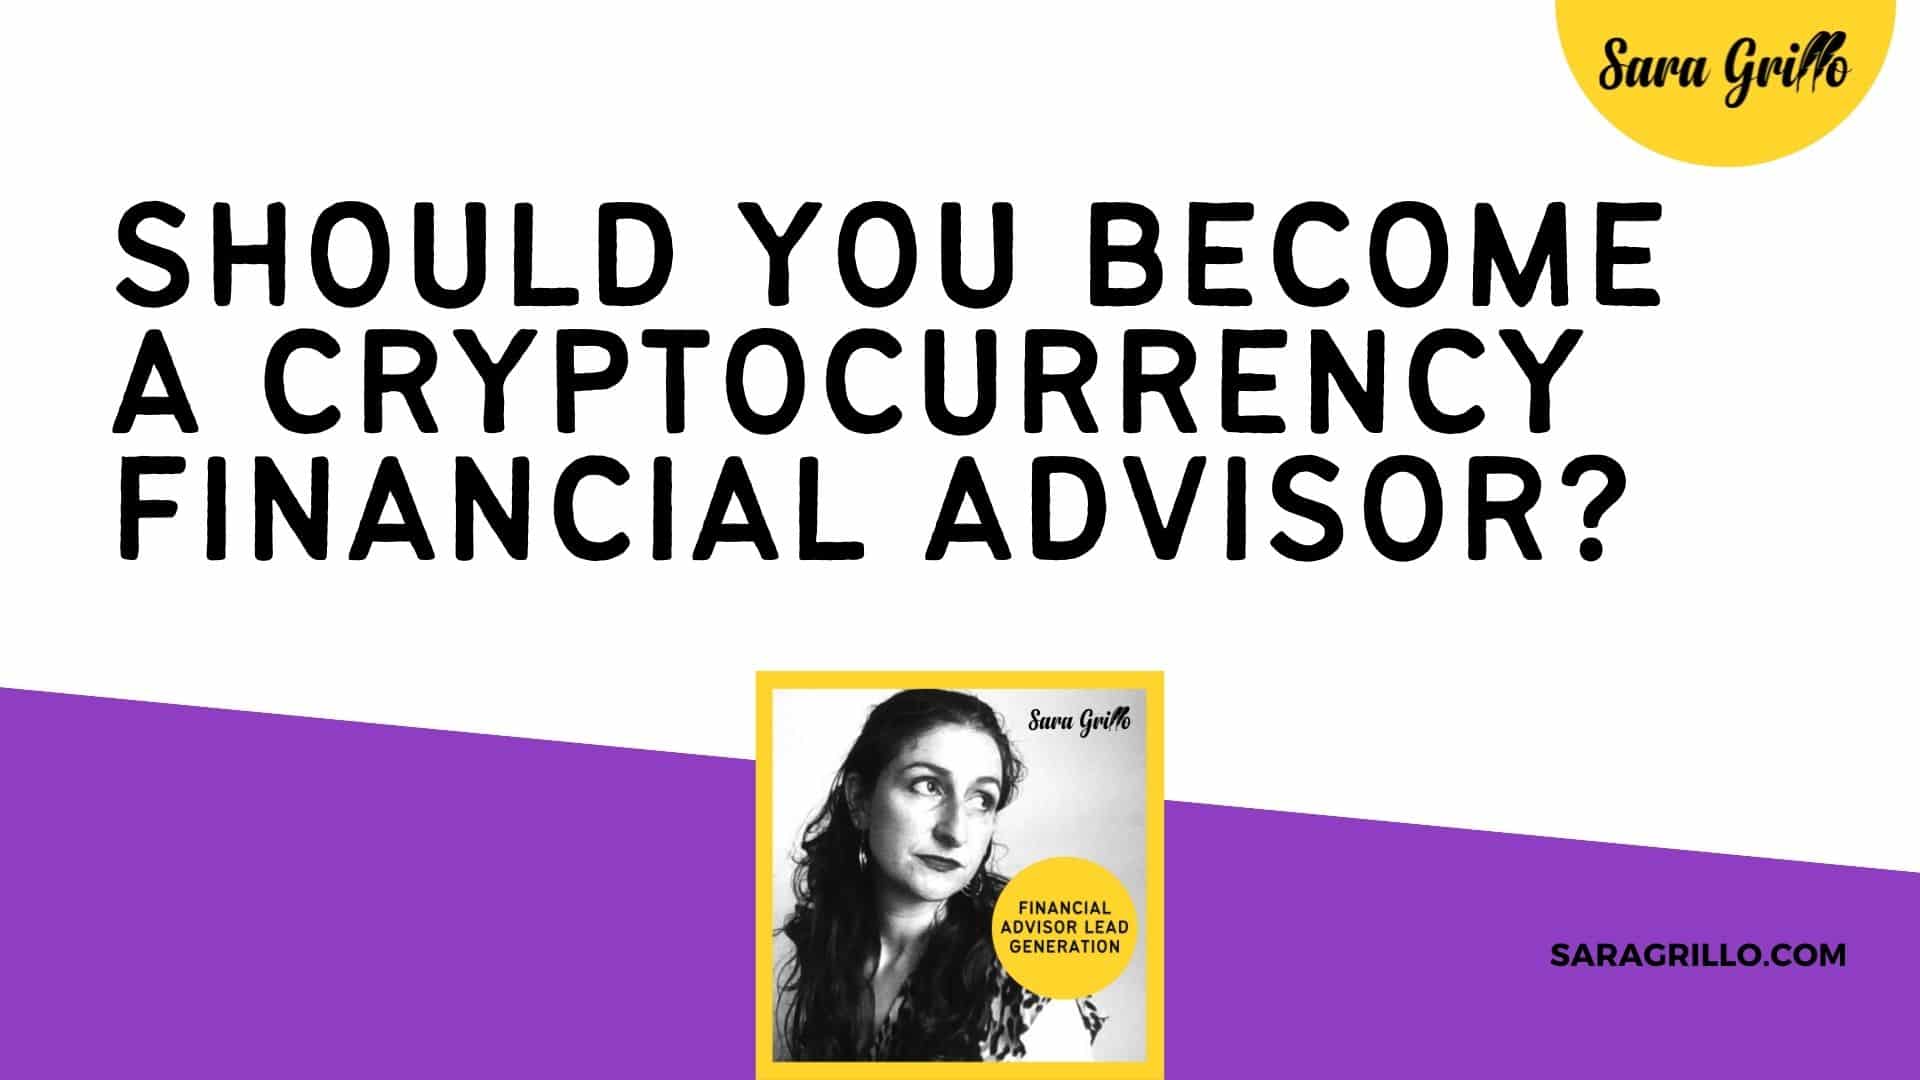 In this blog I am going to talk about the question of whether or not wealth managers should expand their practice offerings and possibly become a cryptocurrency financial advisor.